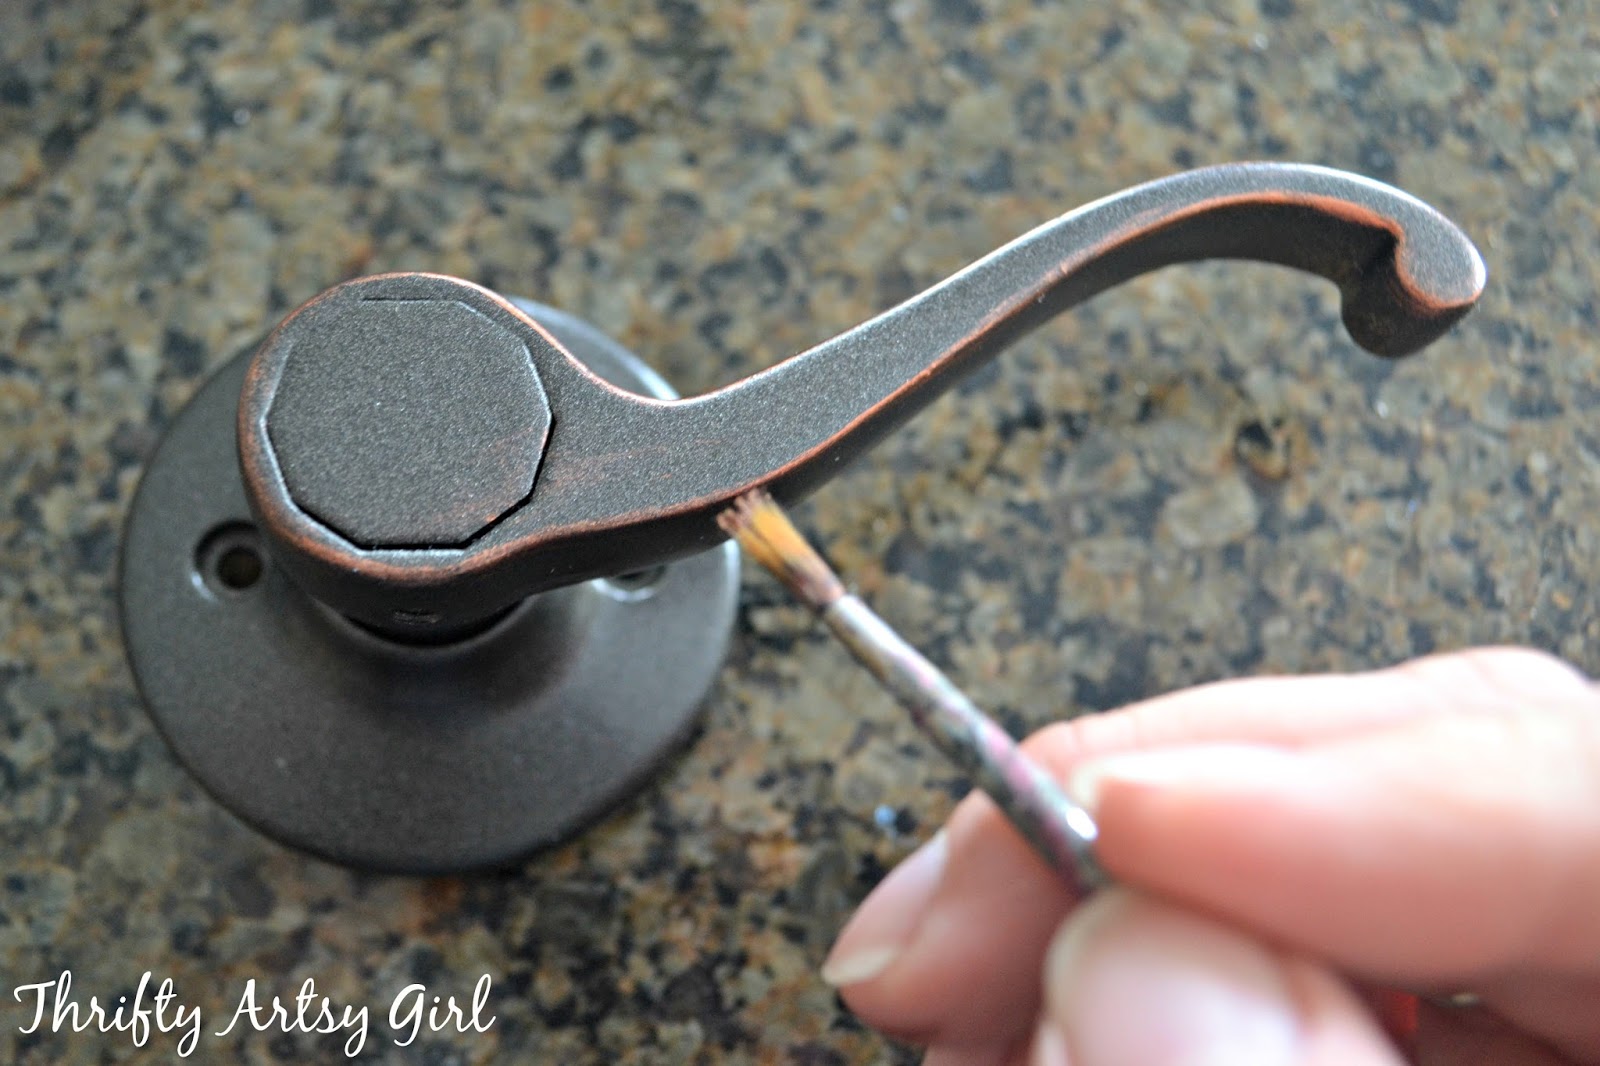 Thrifty Artsy Girl: DIY Spray Painted Doorknobs: From Cheap Brass